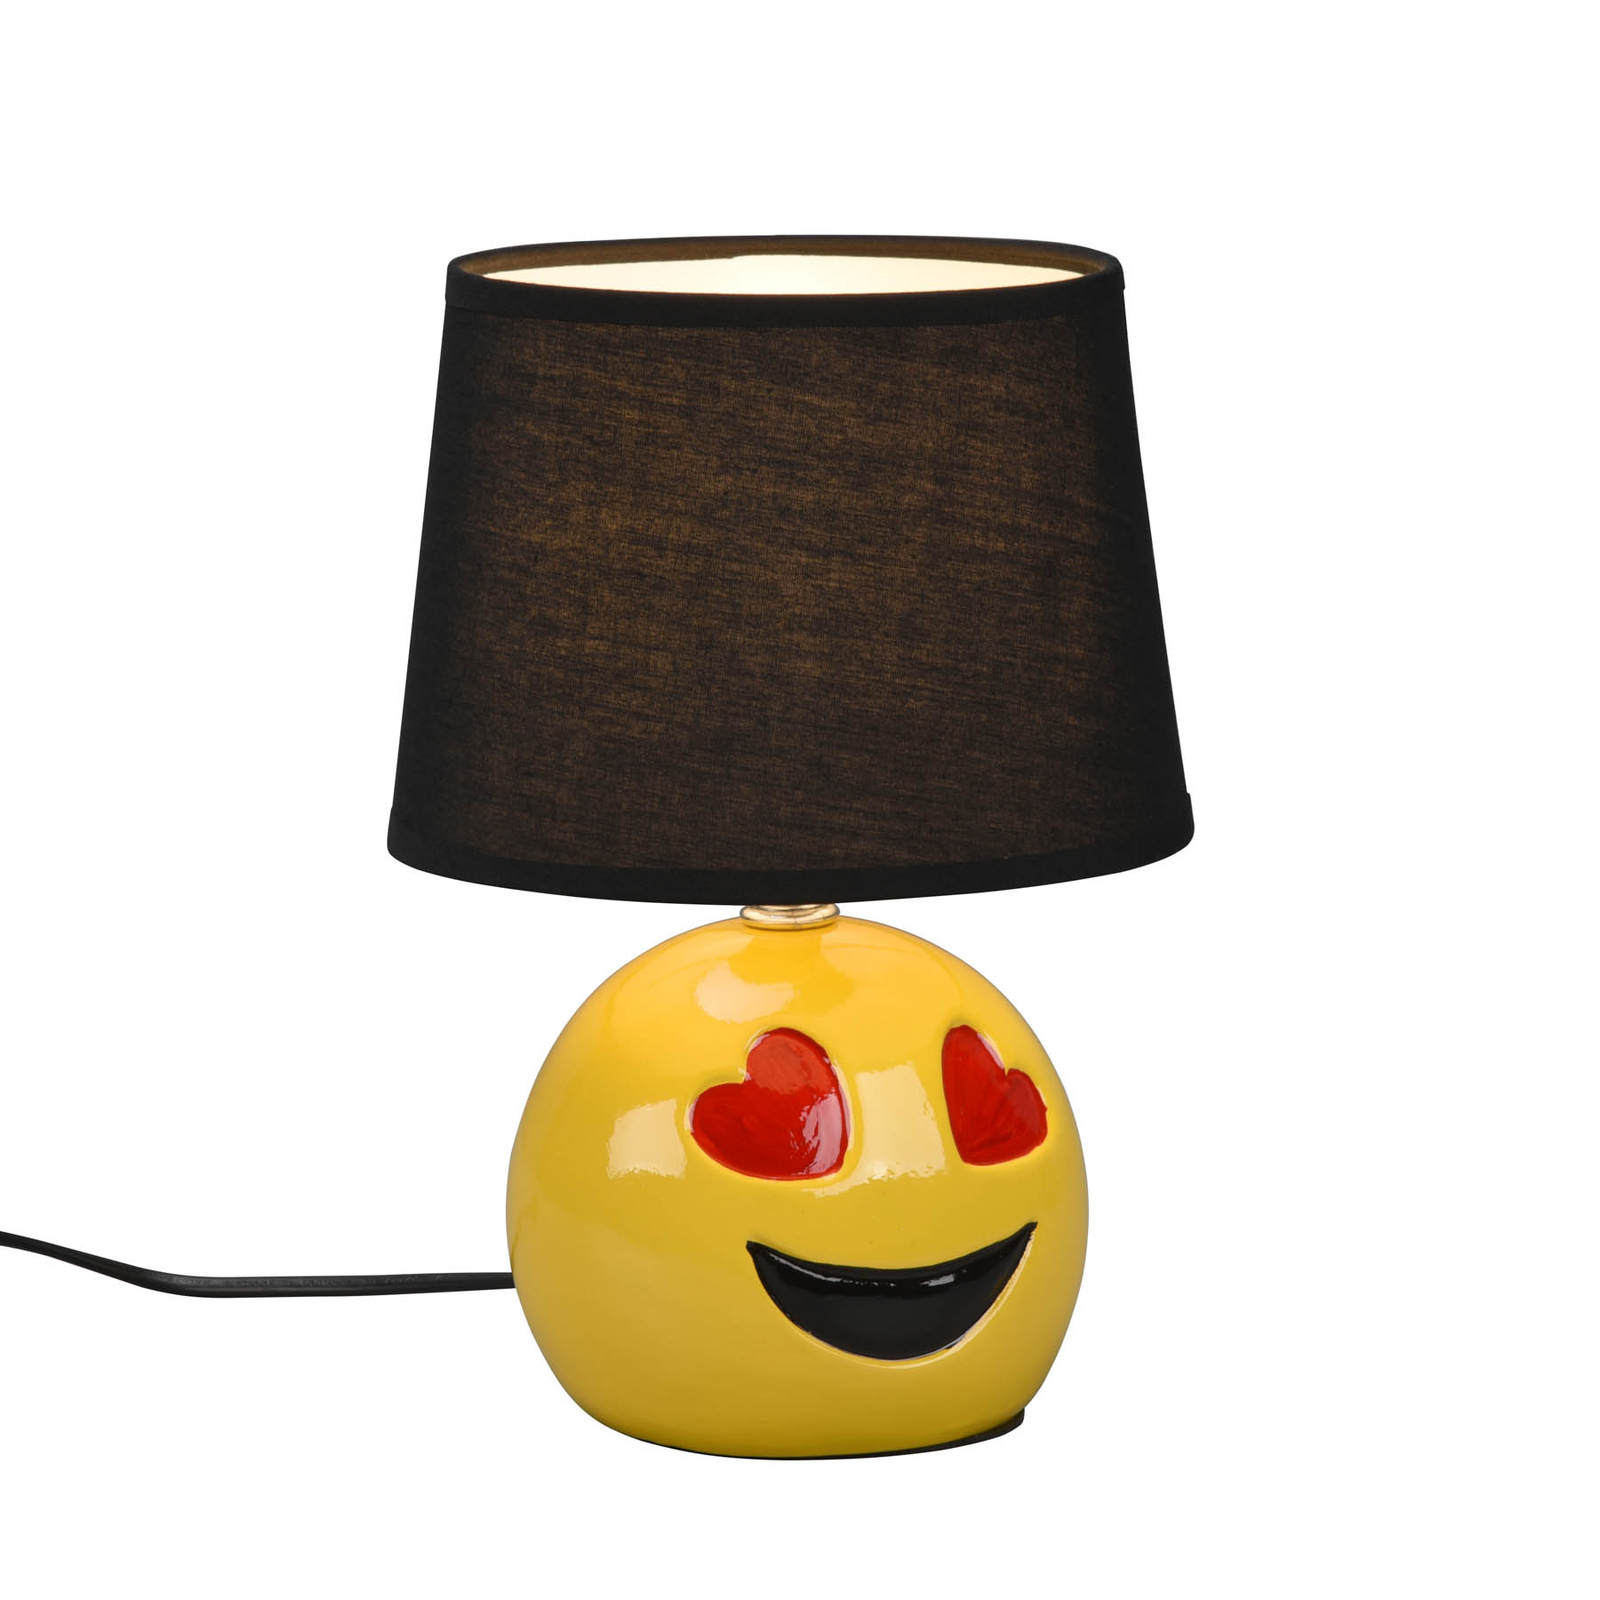 Lovely table lamp, smiley, black fabric lampshade